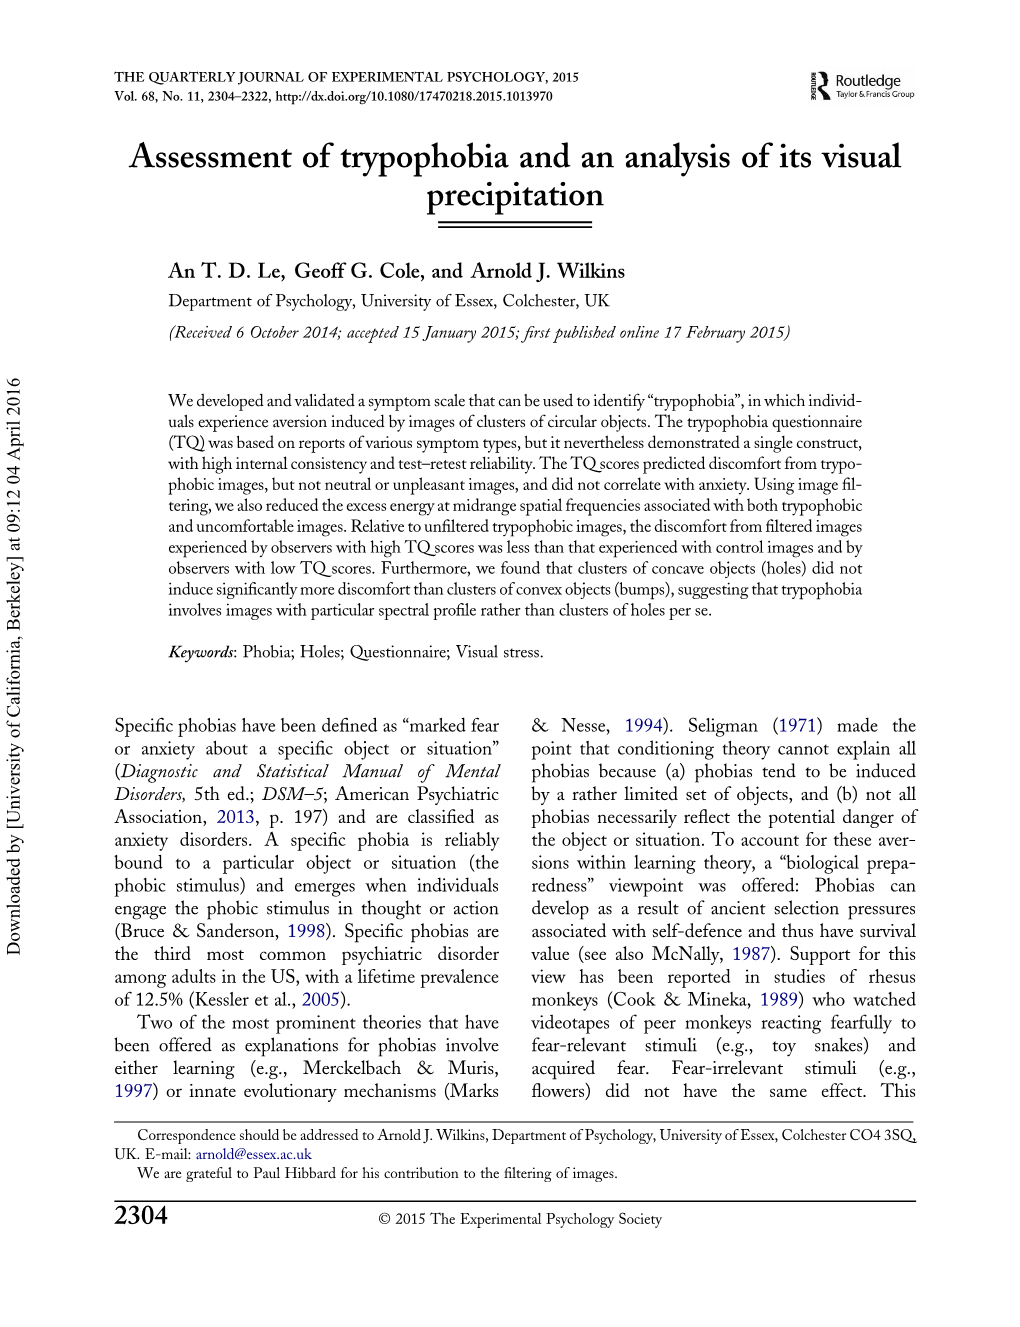 Assessment of Trypophobia and an Analysis of Its Visual Precipitation